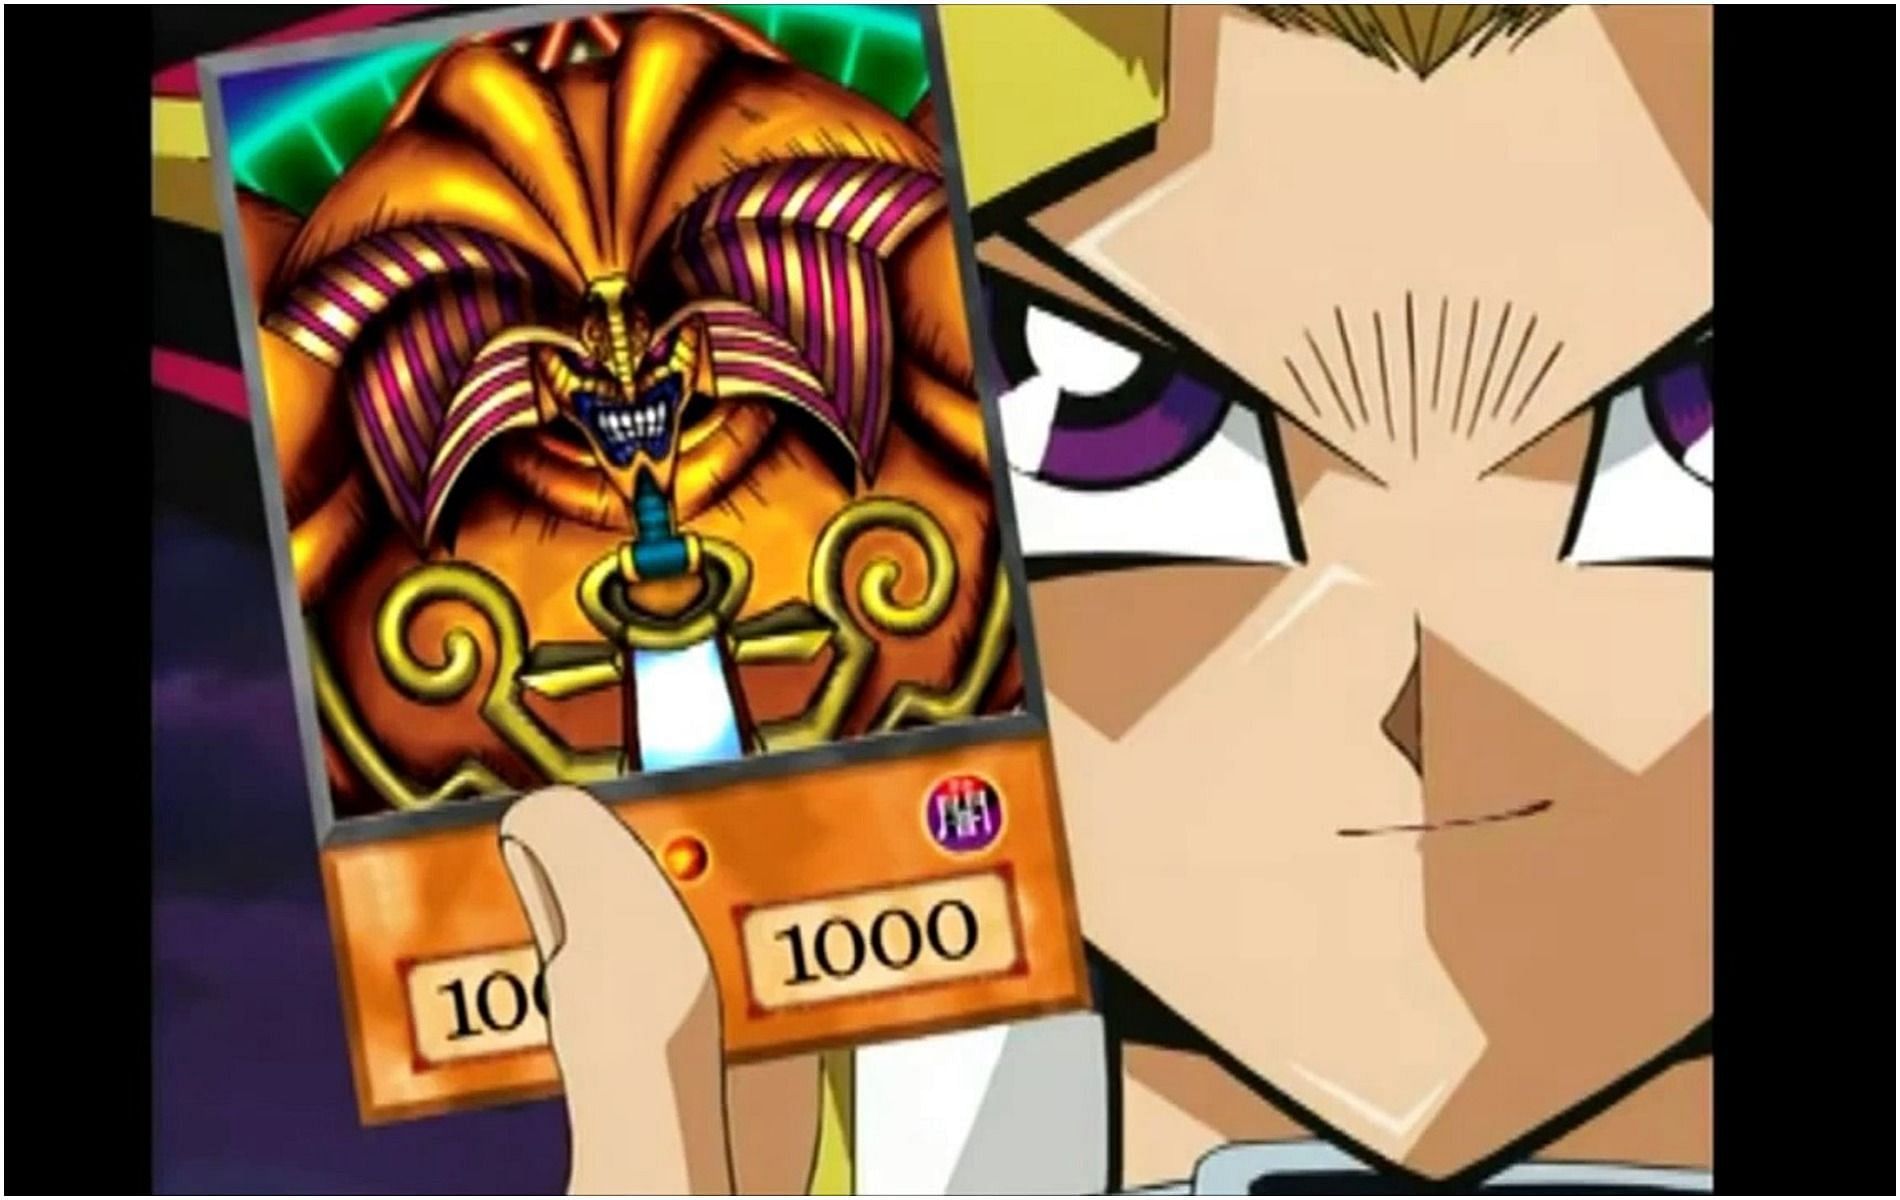 The Exodia deck in Yu-Gi-Oh! Master Duel has many varieties, but all are powerful and fun (Image via Toei Animation)